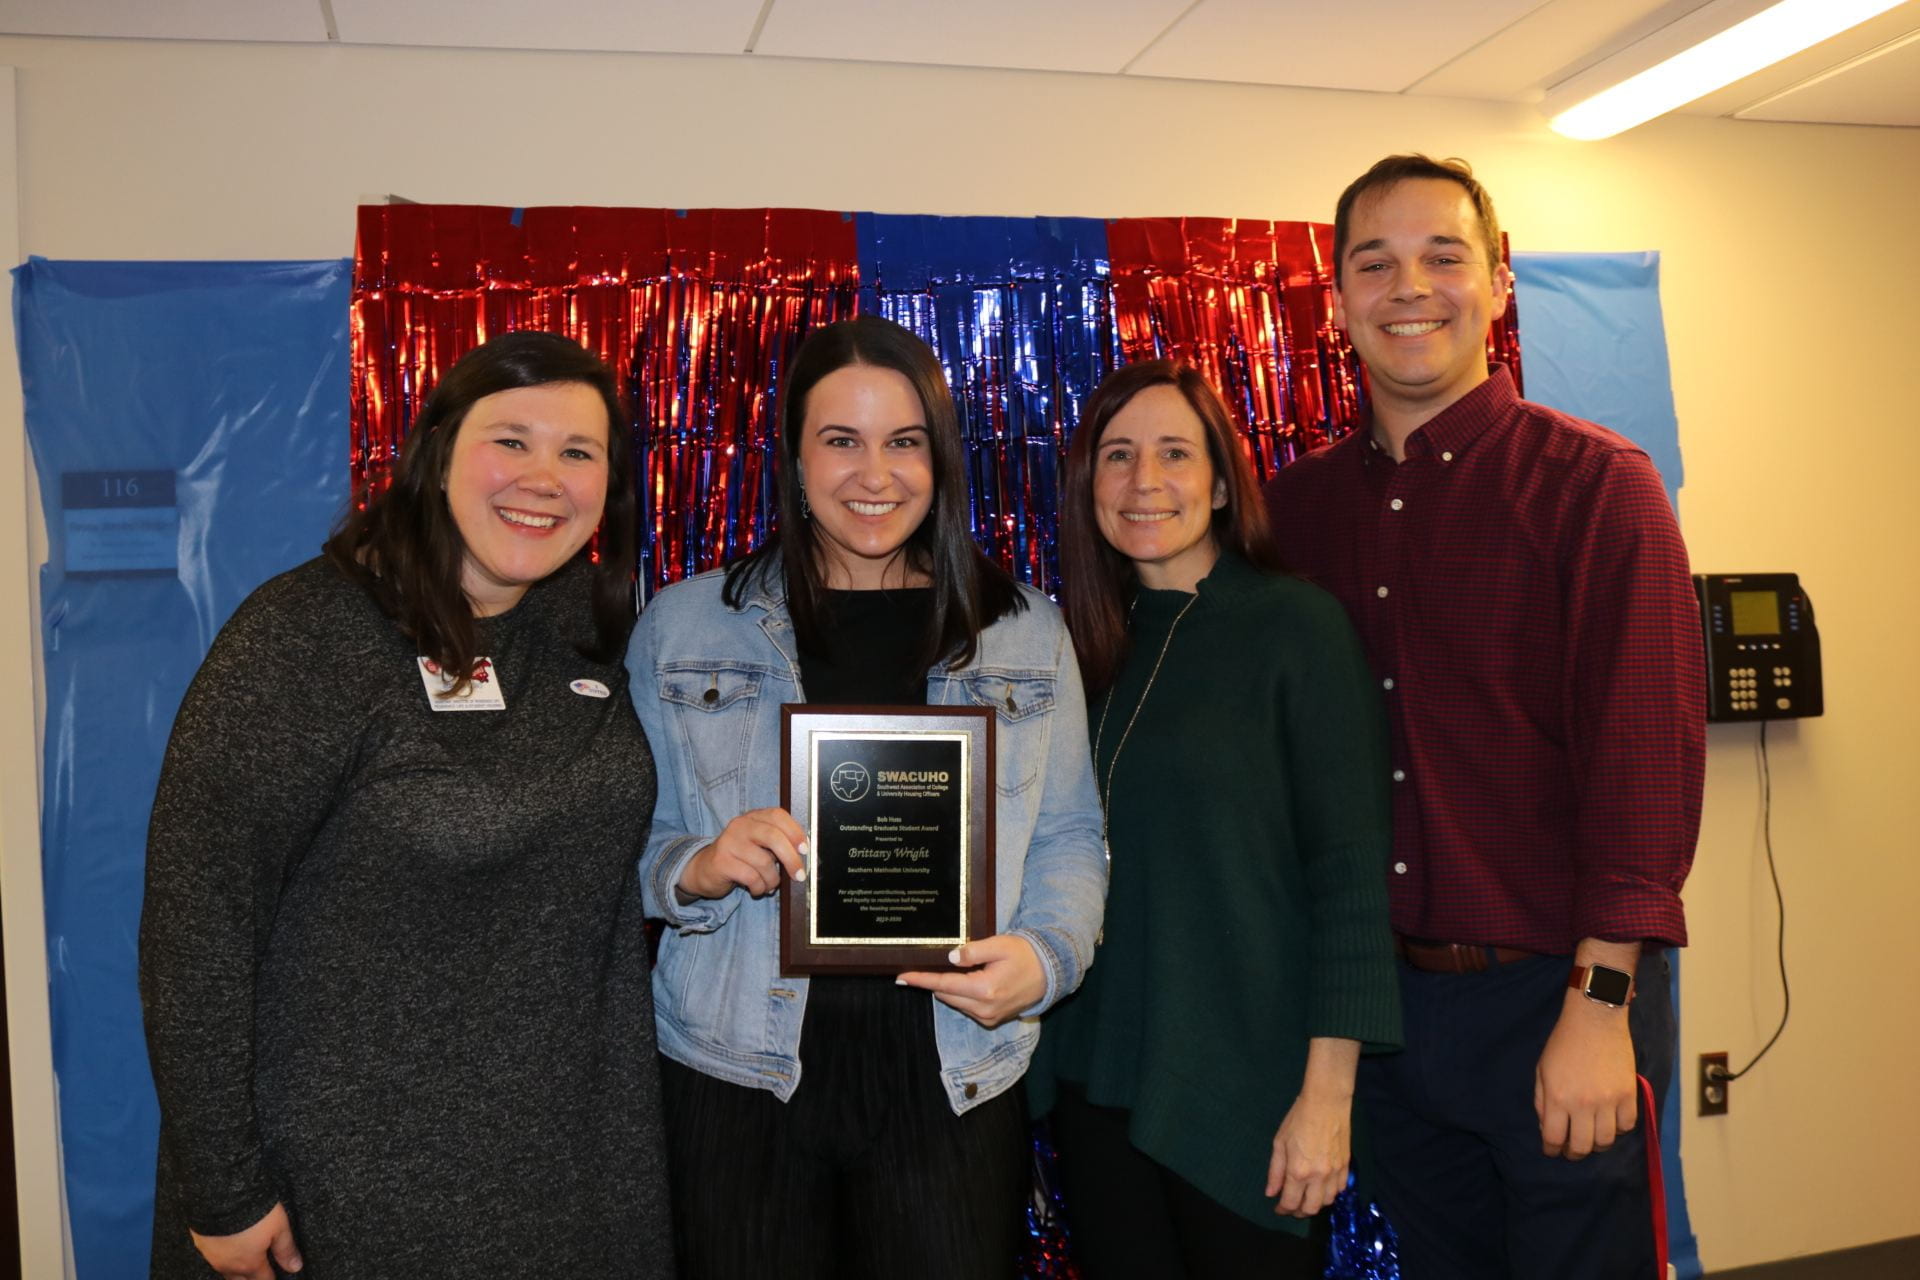 Brittany Wright posing for picture with her SWACUHO Award. Left to right, Amanda Bobo, Brittany Wright, Jennifer Post, and Nate Faust.